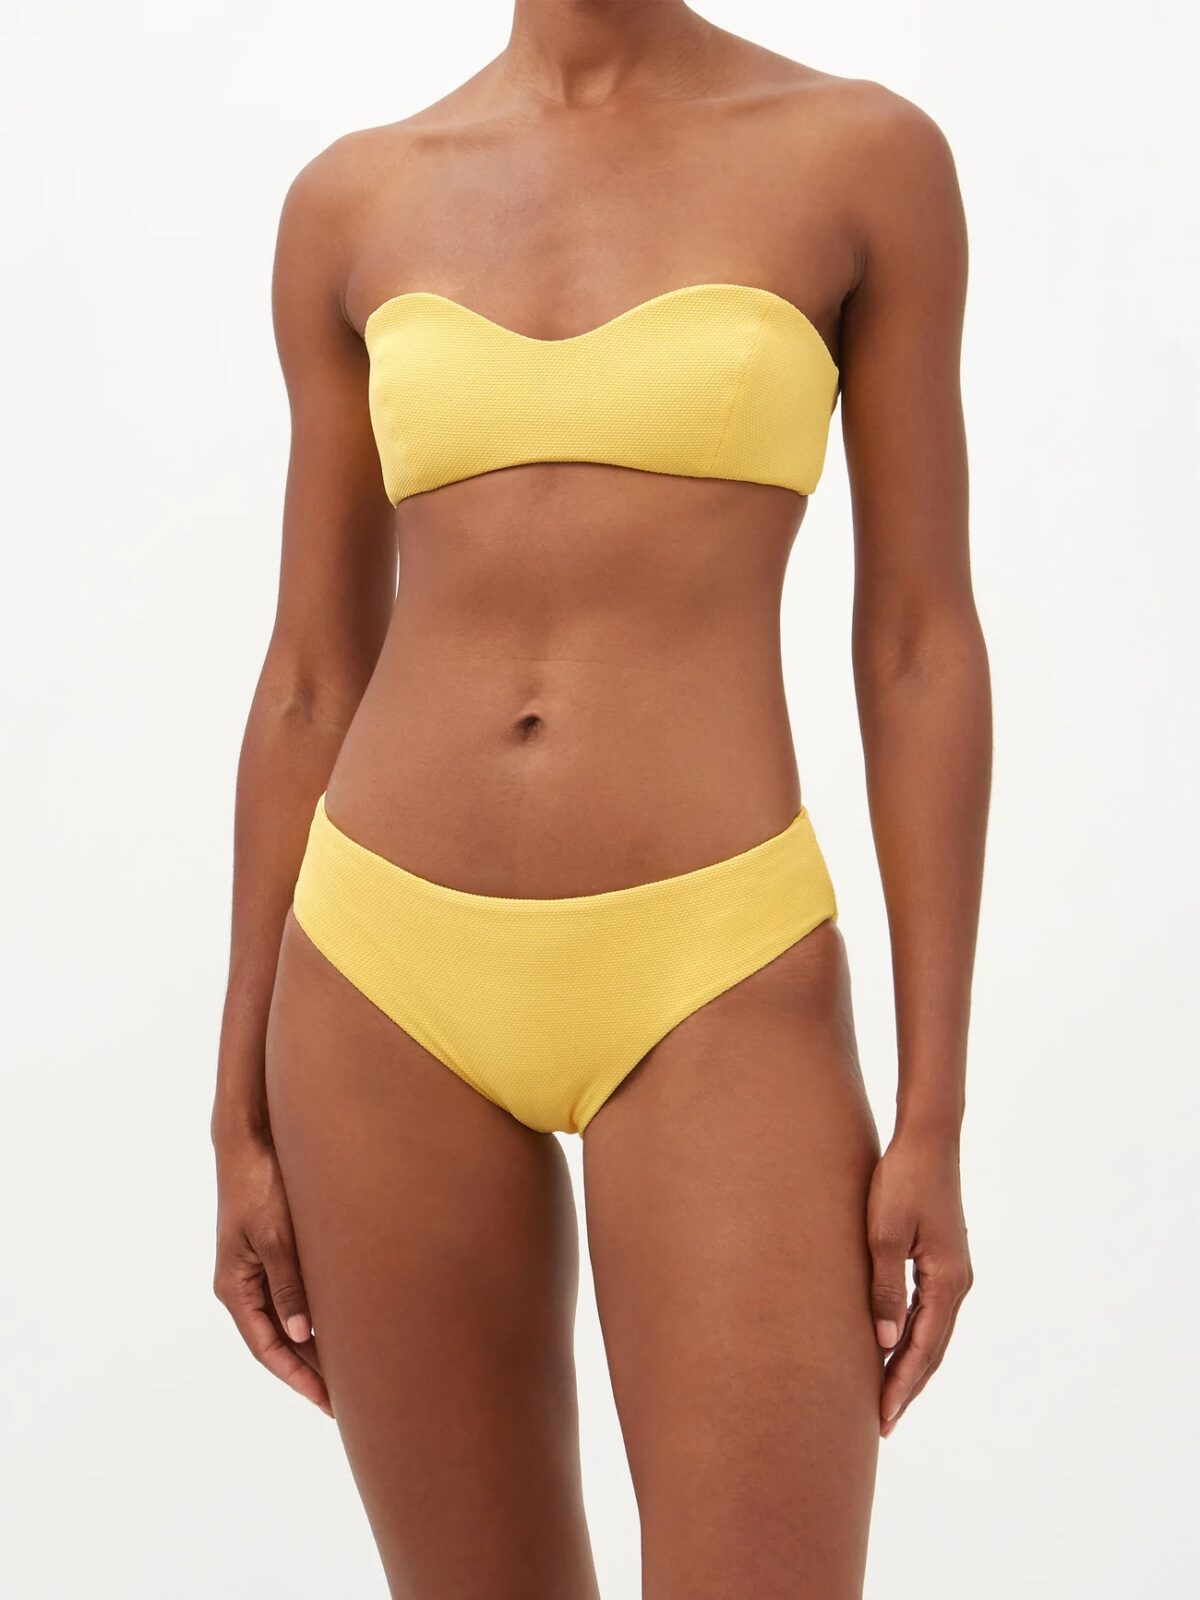 citrus colored swimsuits for women